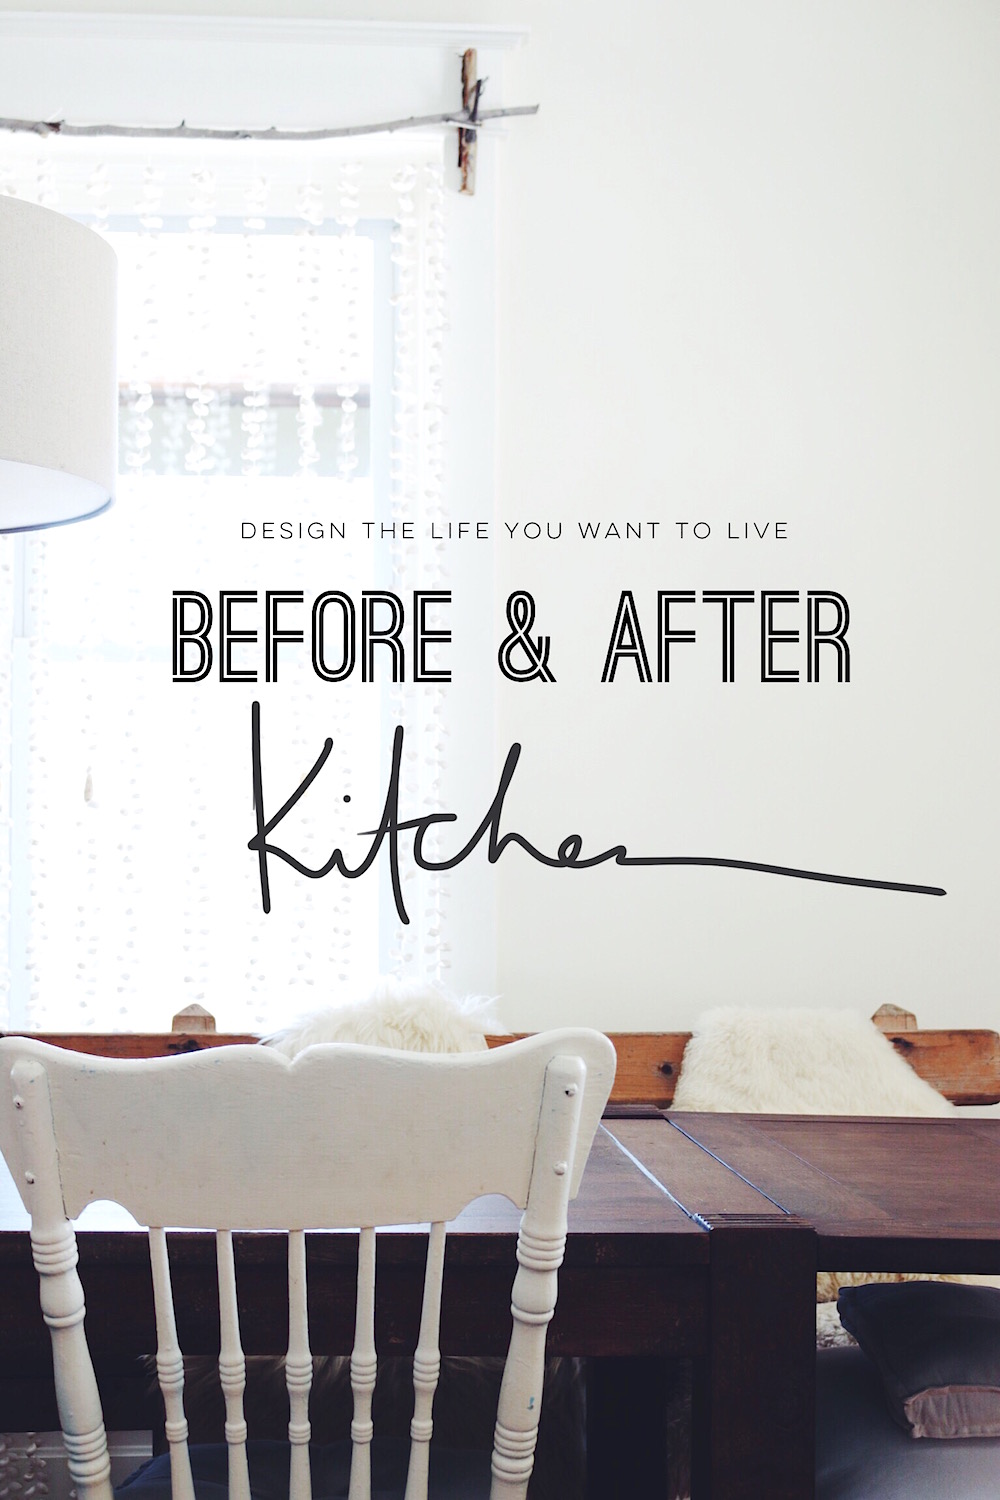 Before/After Kitchen tour: Get some fab ideas for your kitchen